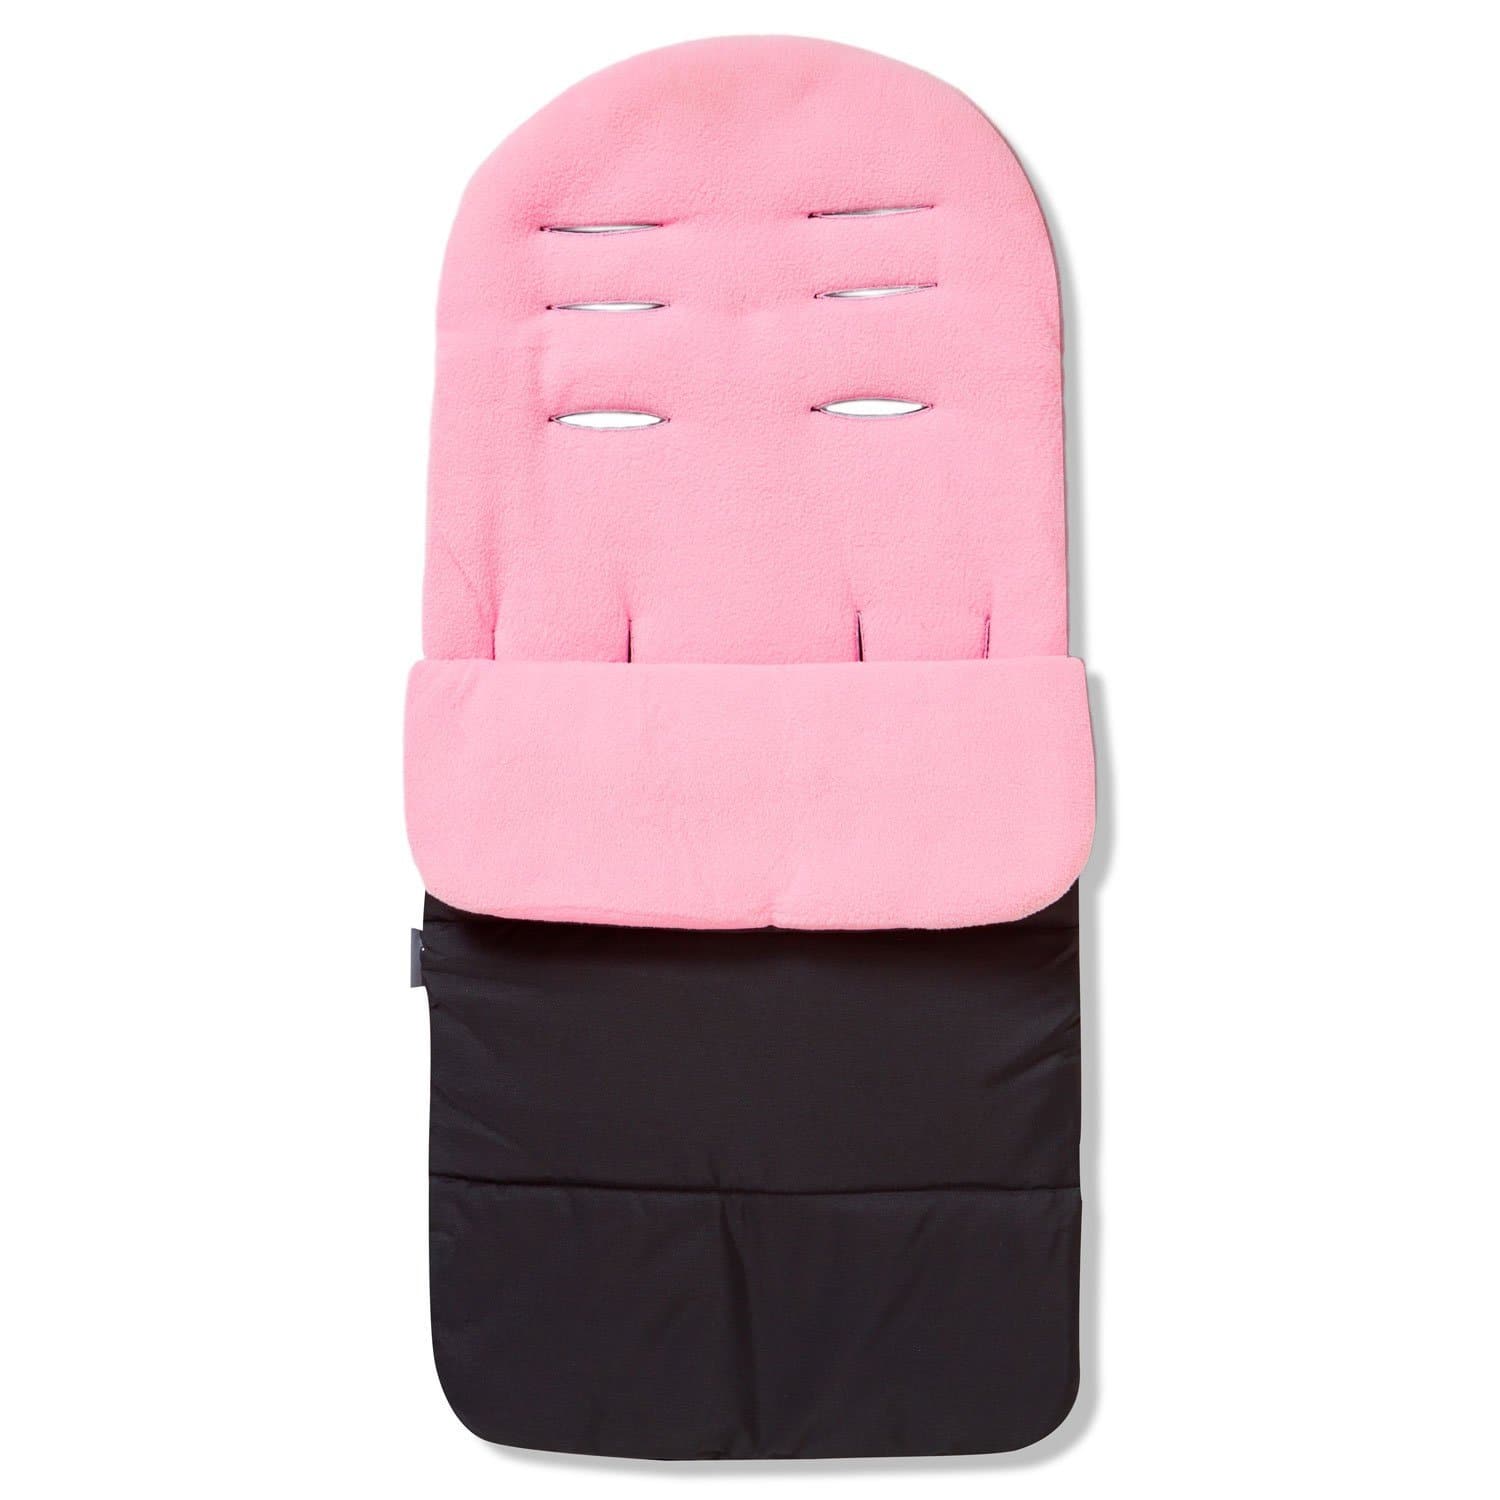 Premium Footmuff / Cosy Toes Compatible with Baby Elegance - Candy Pink / Fits All Models | For Your Little One